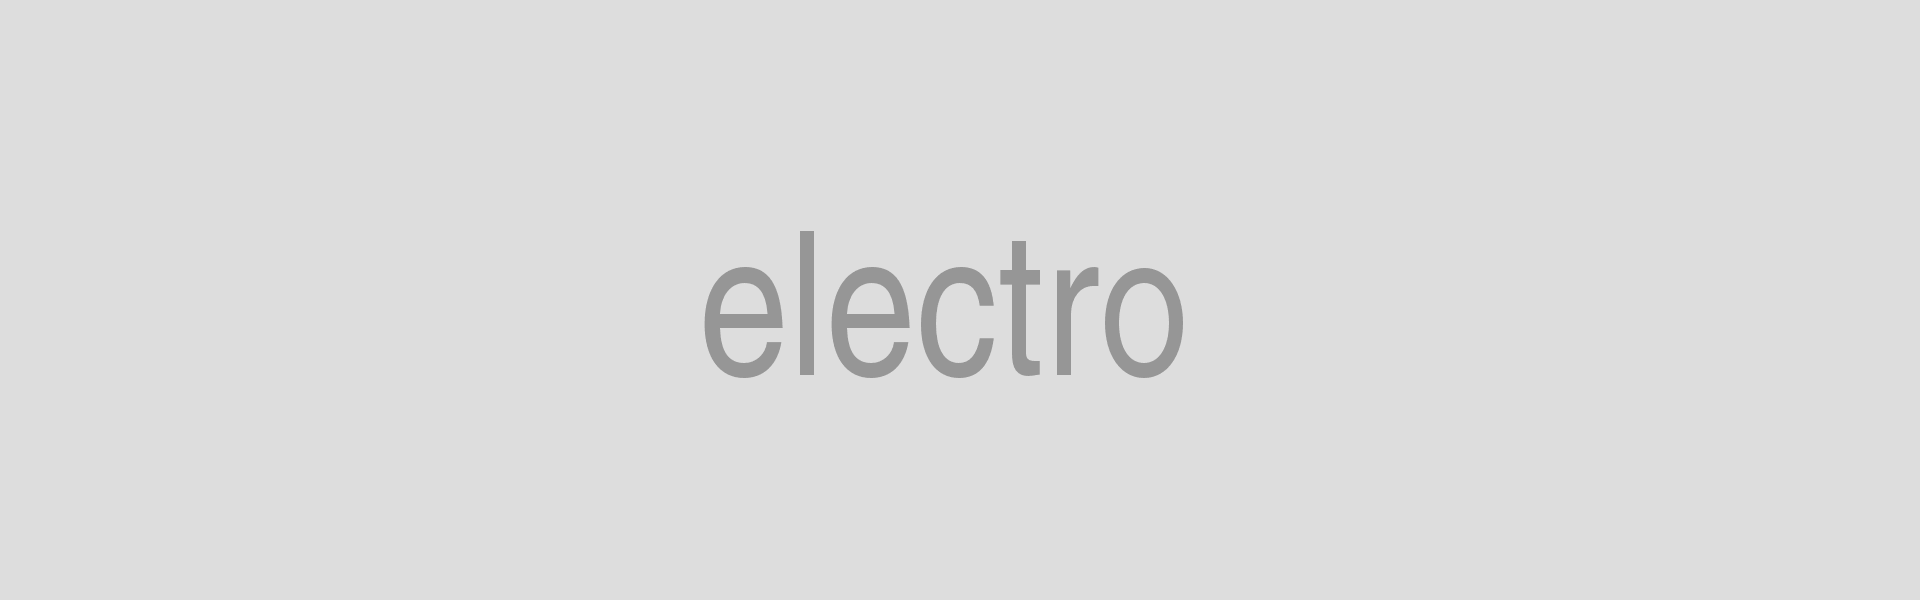 electro home placeholder background 2